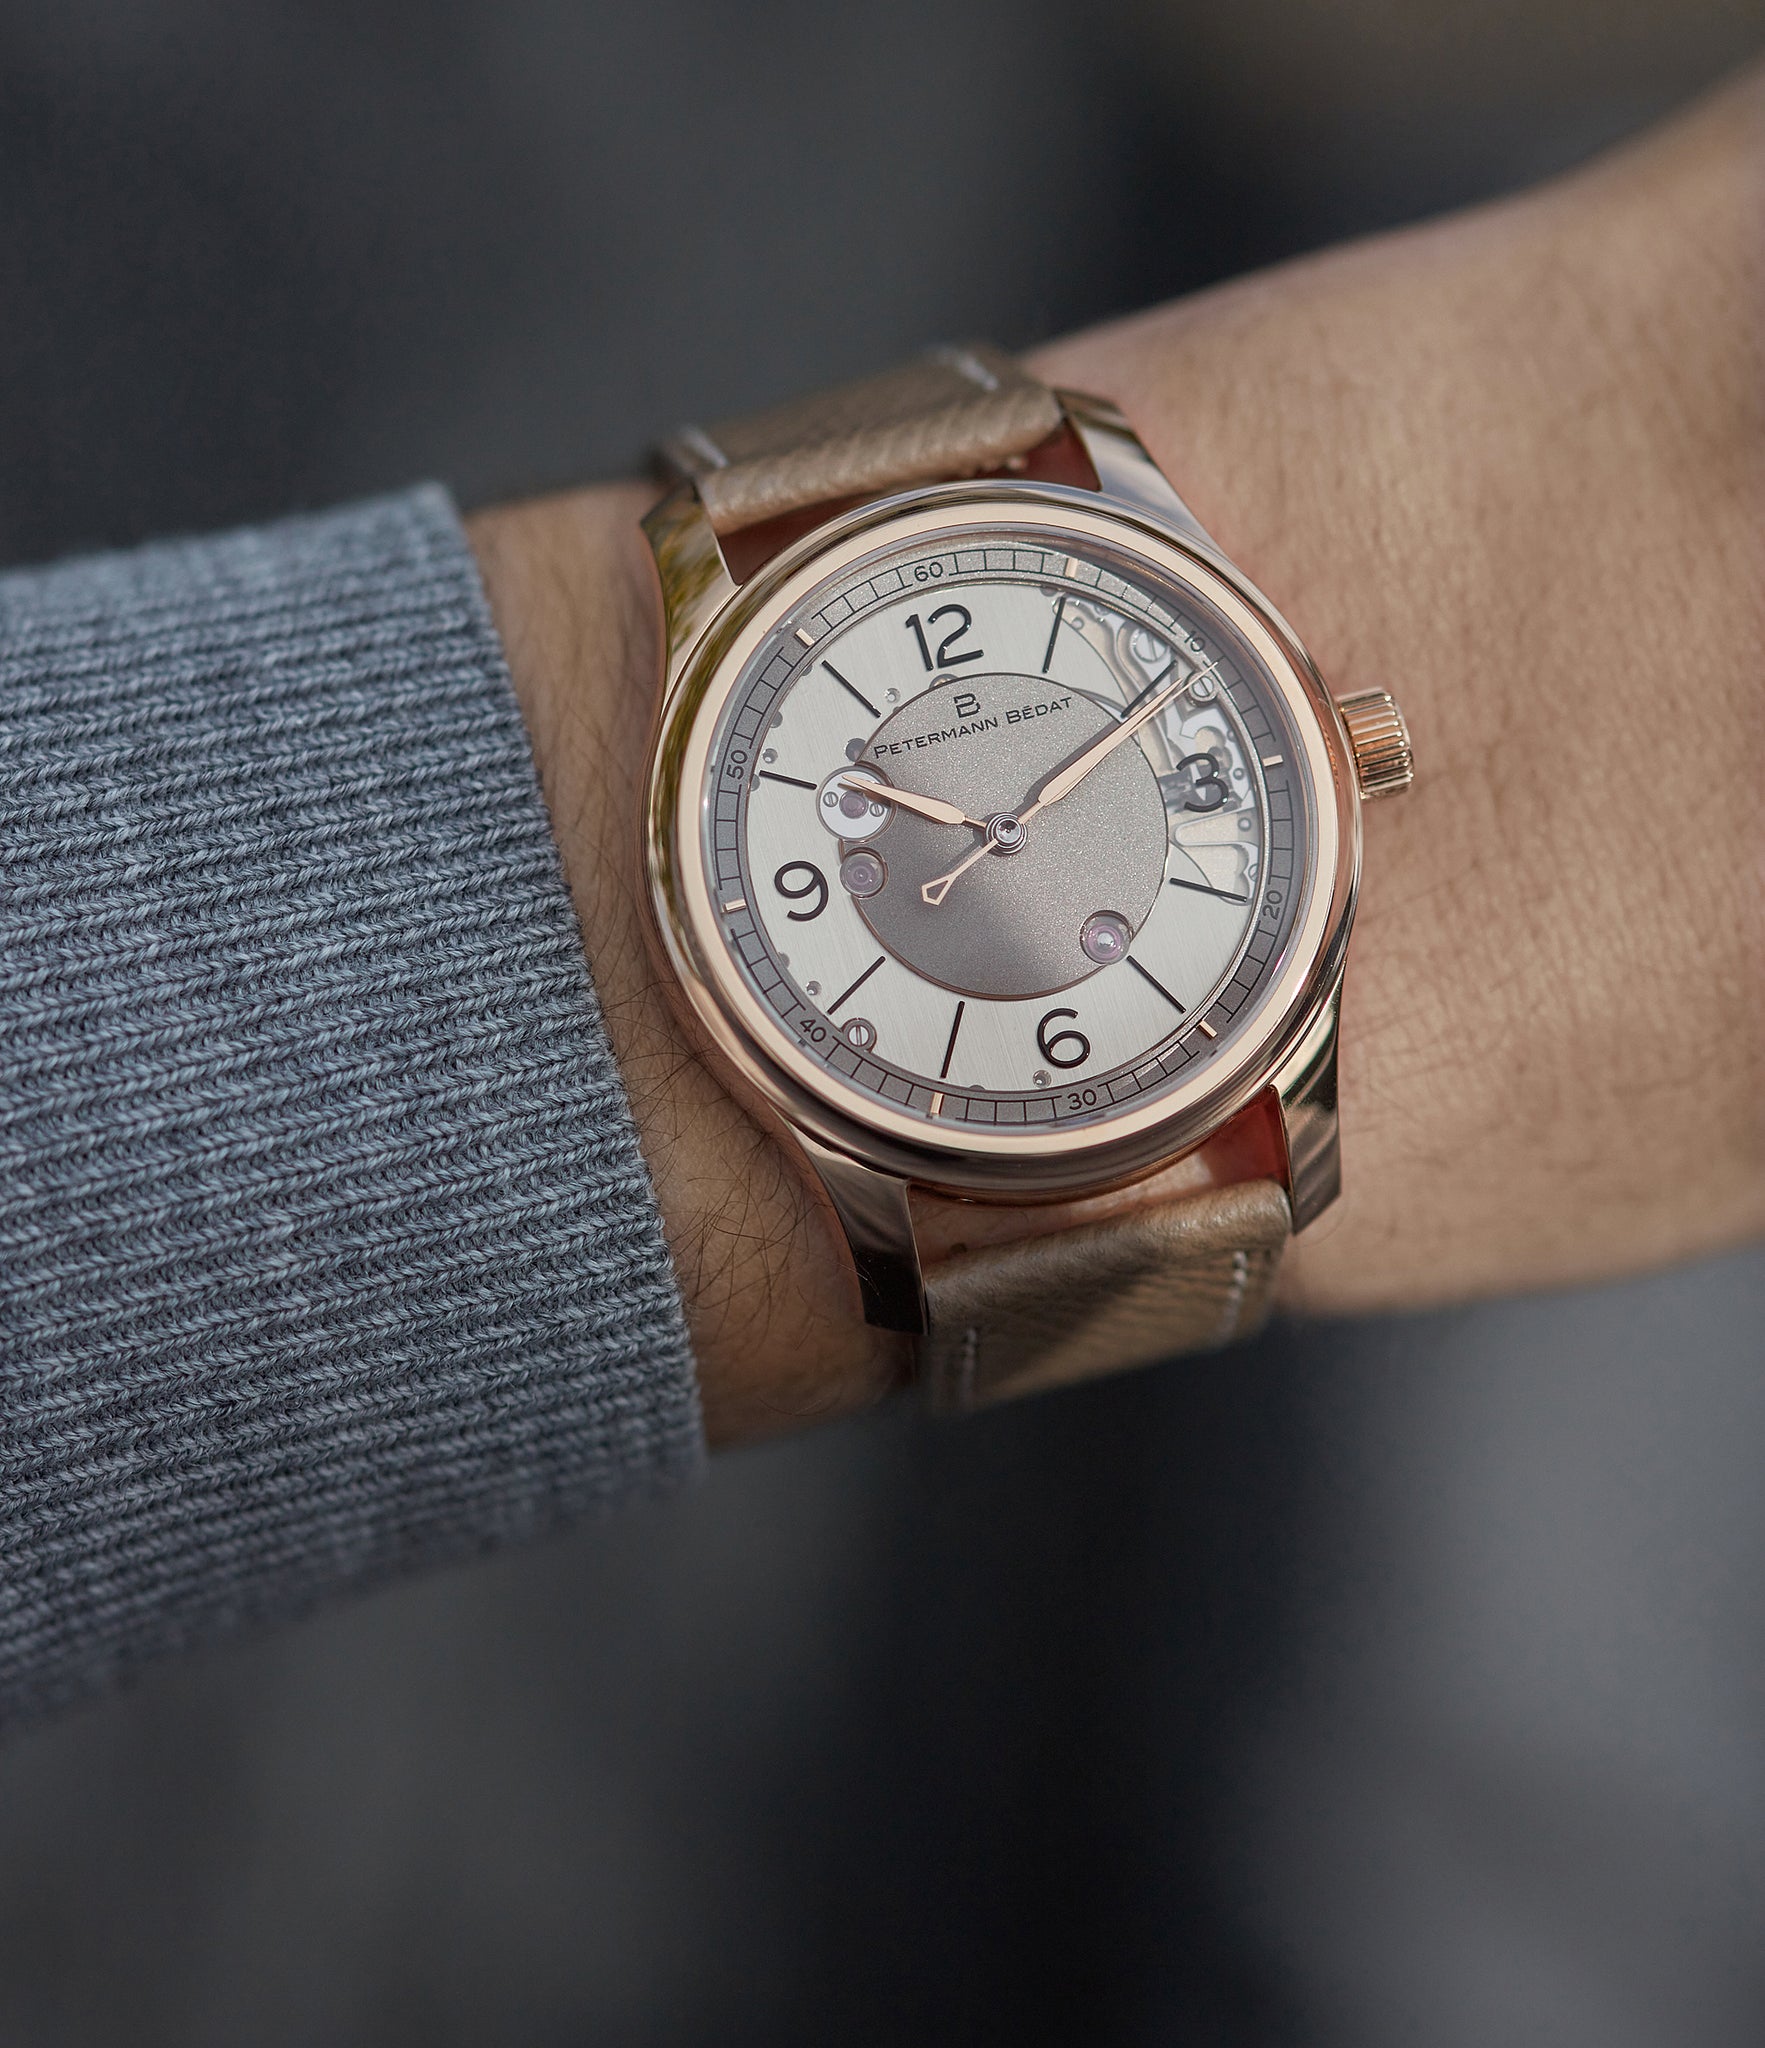 Petermann Bédat wristwatch 967 Deadbeat Seconds rose gold time-only watch independent watchmakers order official retailer A Collected Man London